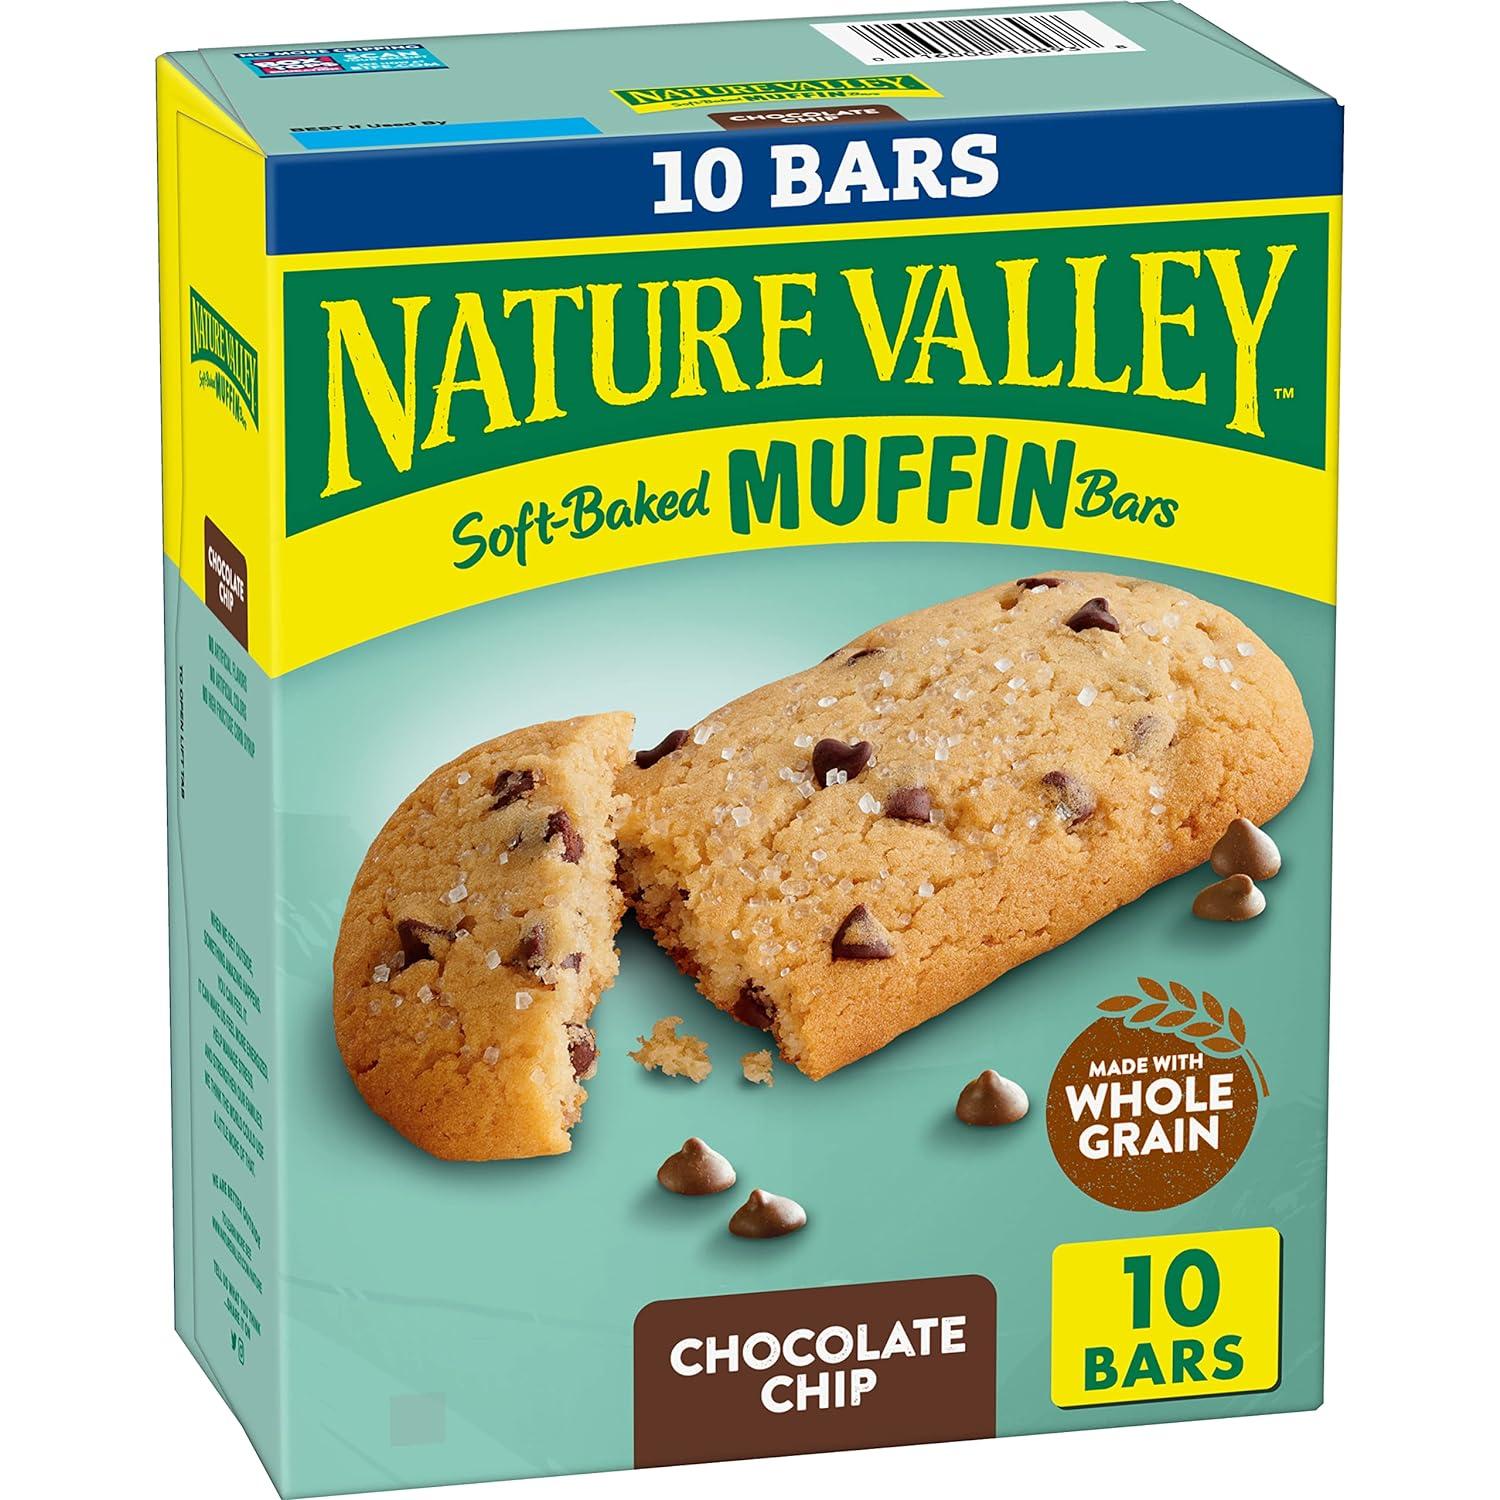 Nature Valley Chocolate Chip Soft-Baked Muffin Bars 10 Pack for $2.80